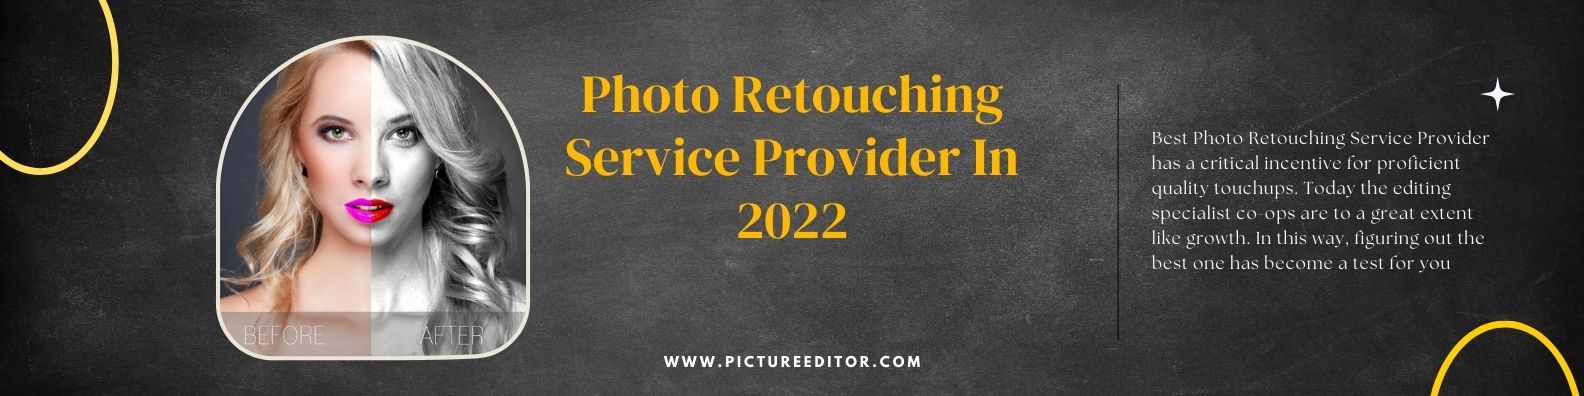 Photo Retouching Service Provider In 2022